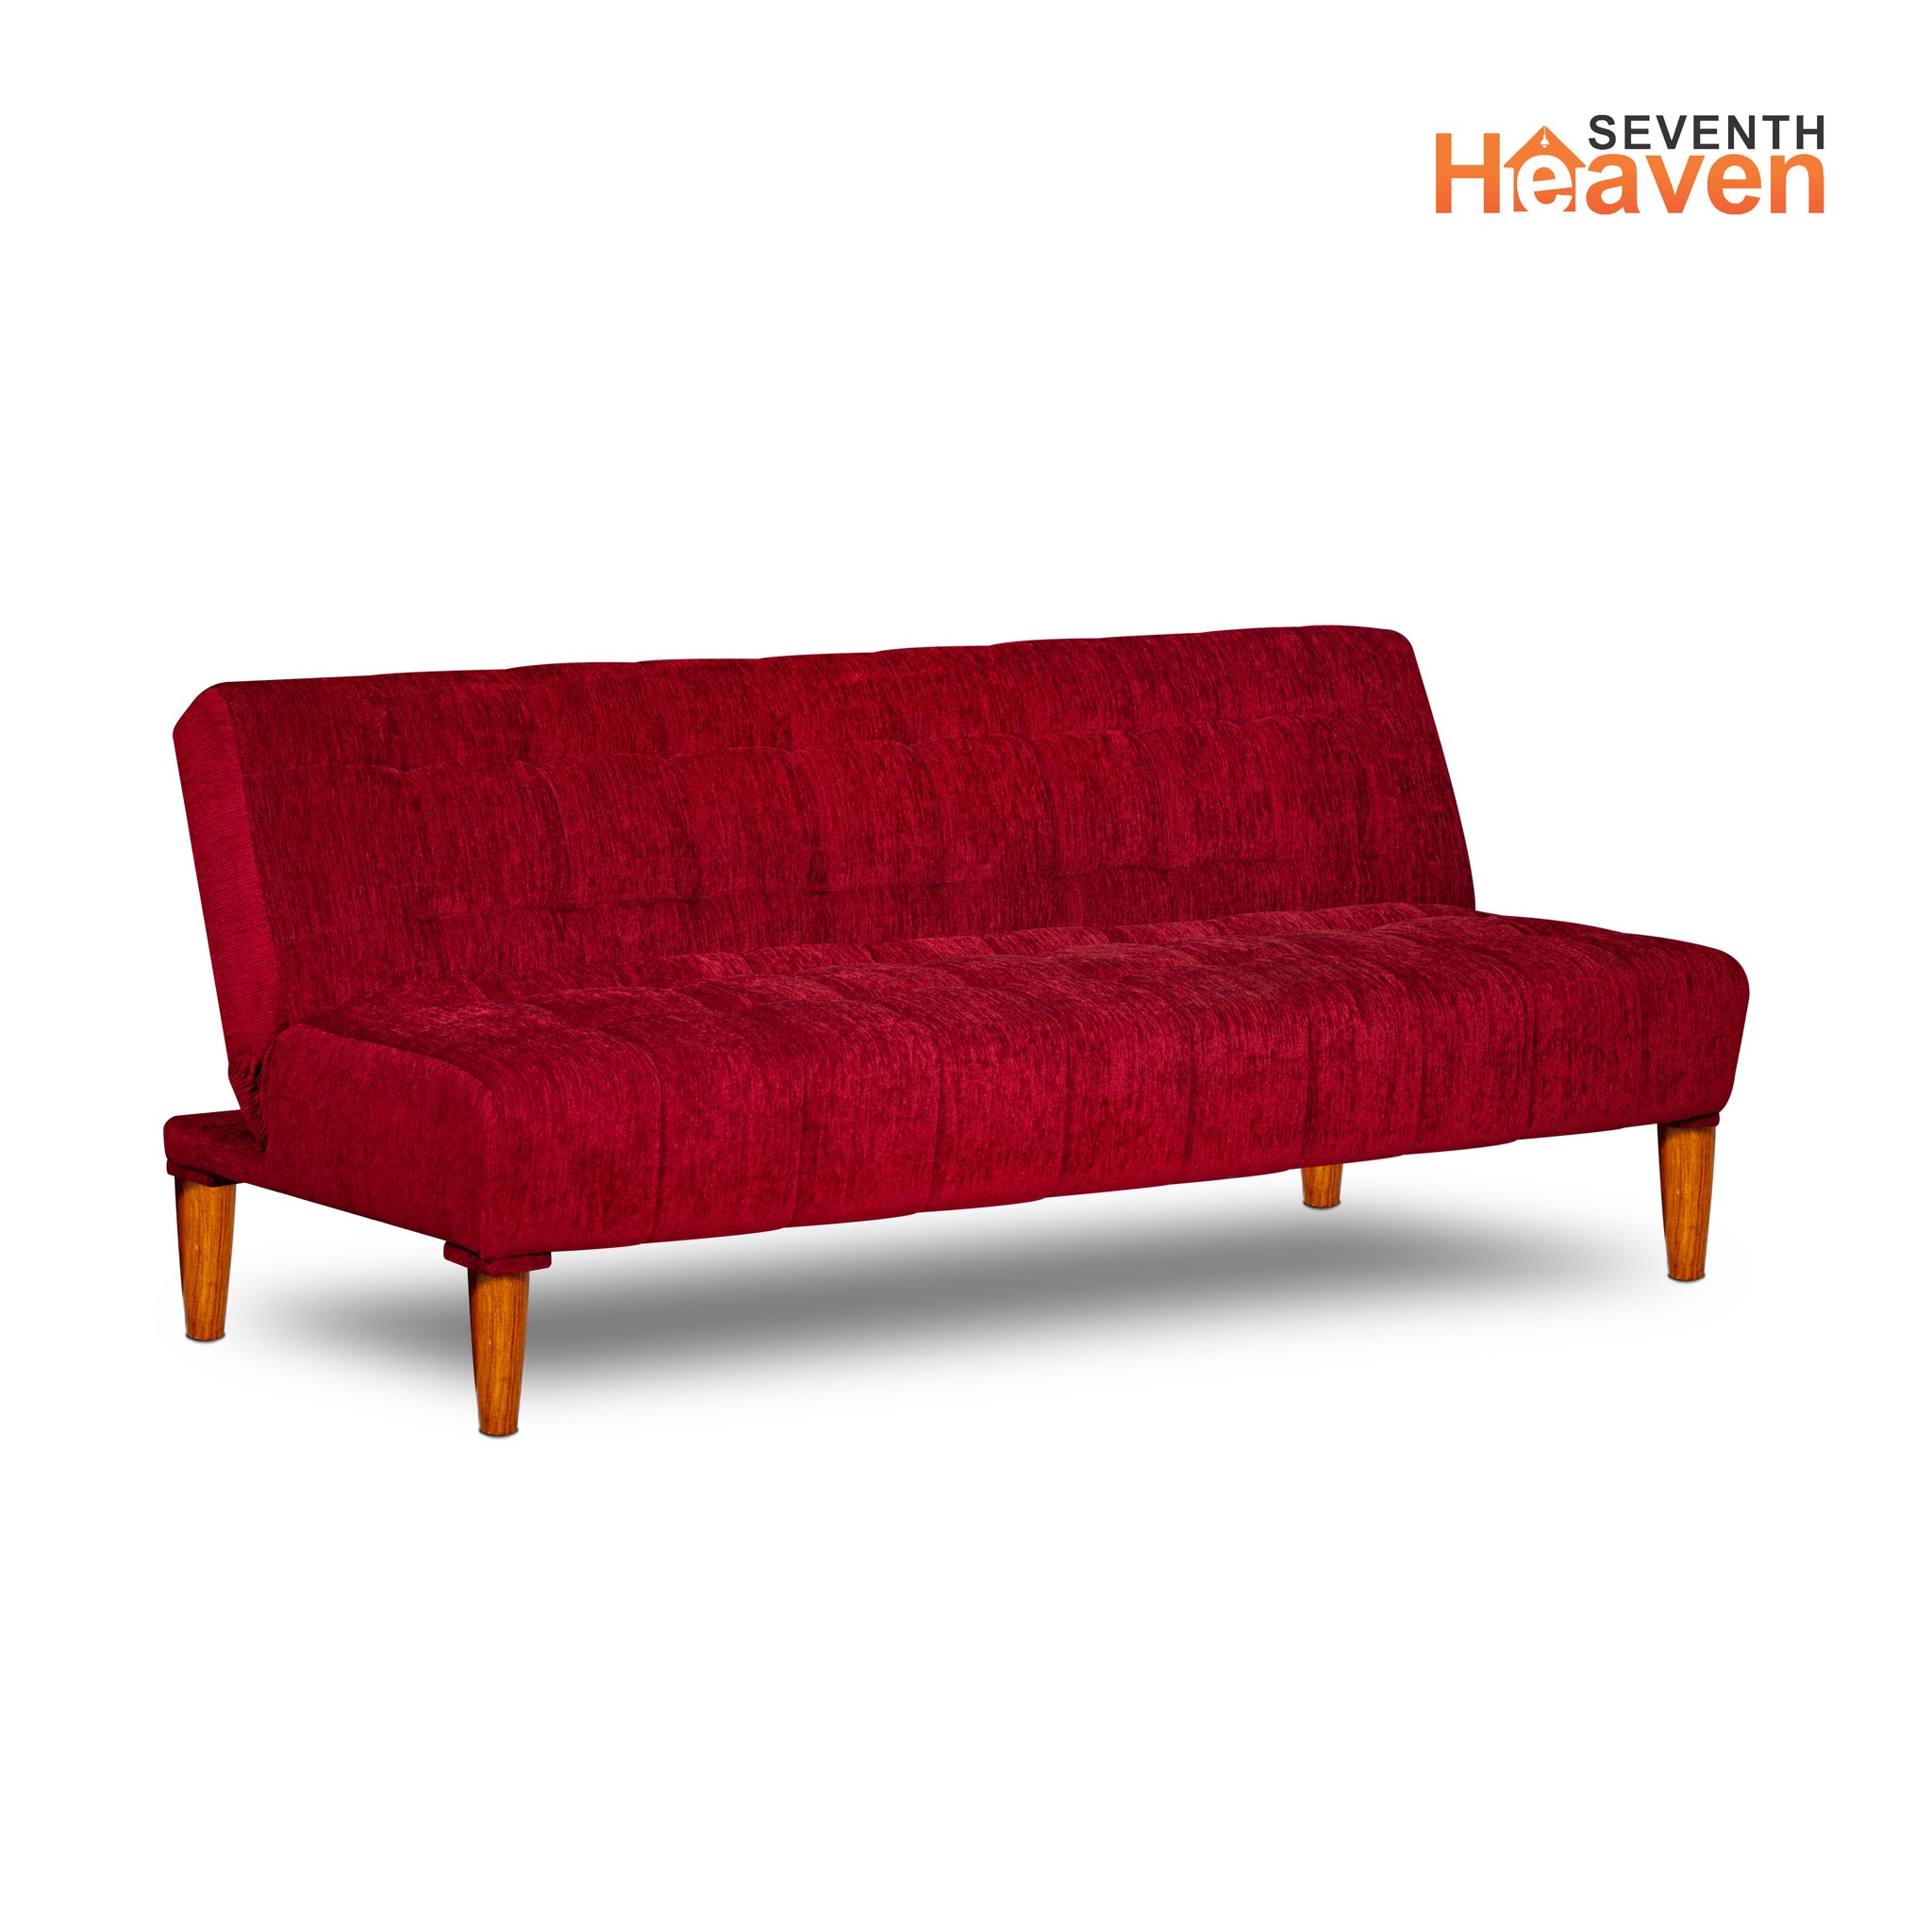 Seventh Heaven Florida Neo 4 Seater Wooden Sofa Cum Bed Modern & Elegant Smart Furniture Range for luxurious homes, living rooms and offices. Use as a sofa, lounger or bed. Perfect for guests. Molphino fabric with sheesham polished wooden legs. Maroon colour.